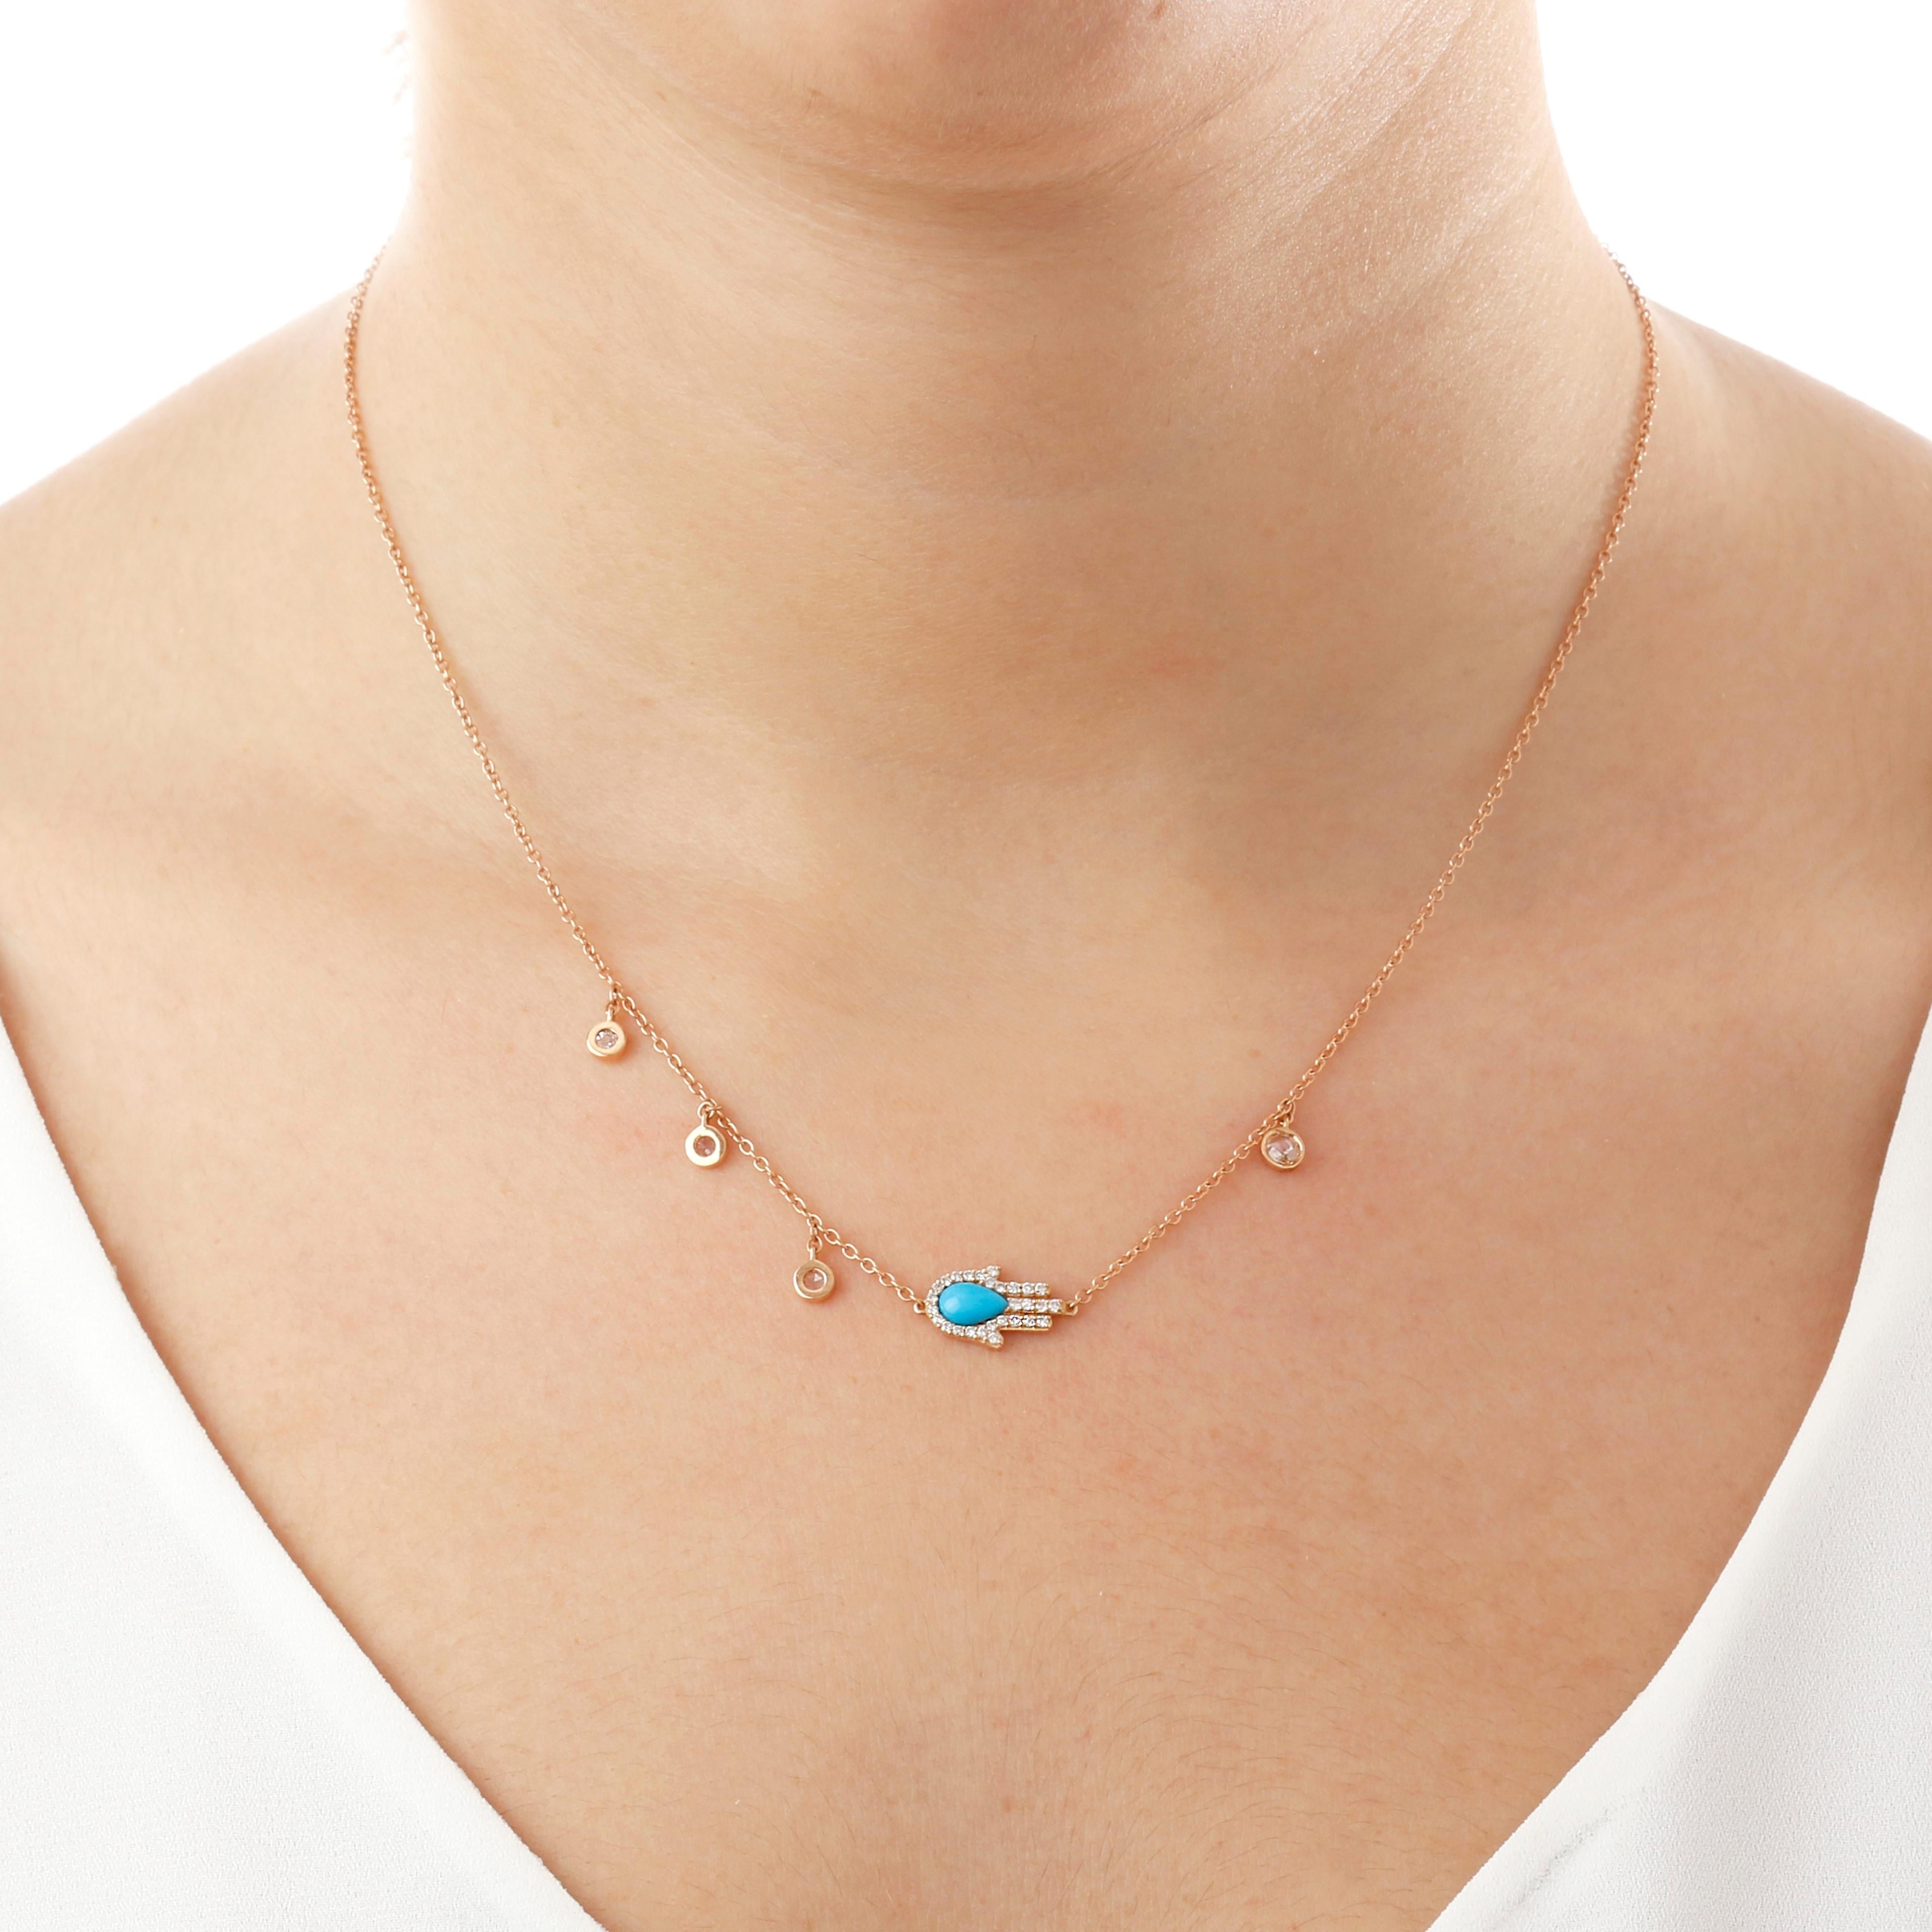 This necklace is crafted in 18kt rose gold and features a diamond and turquoise hand pendant. The hand symbolizes protection and good luck, making this necklace both stylish and meaningful. The hand is adorned with sparkling diamonds, adding a touch